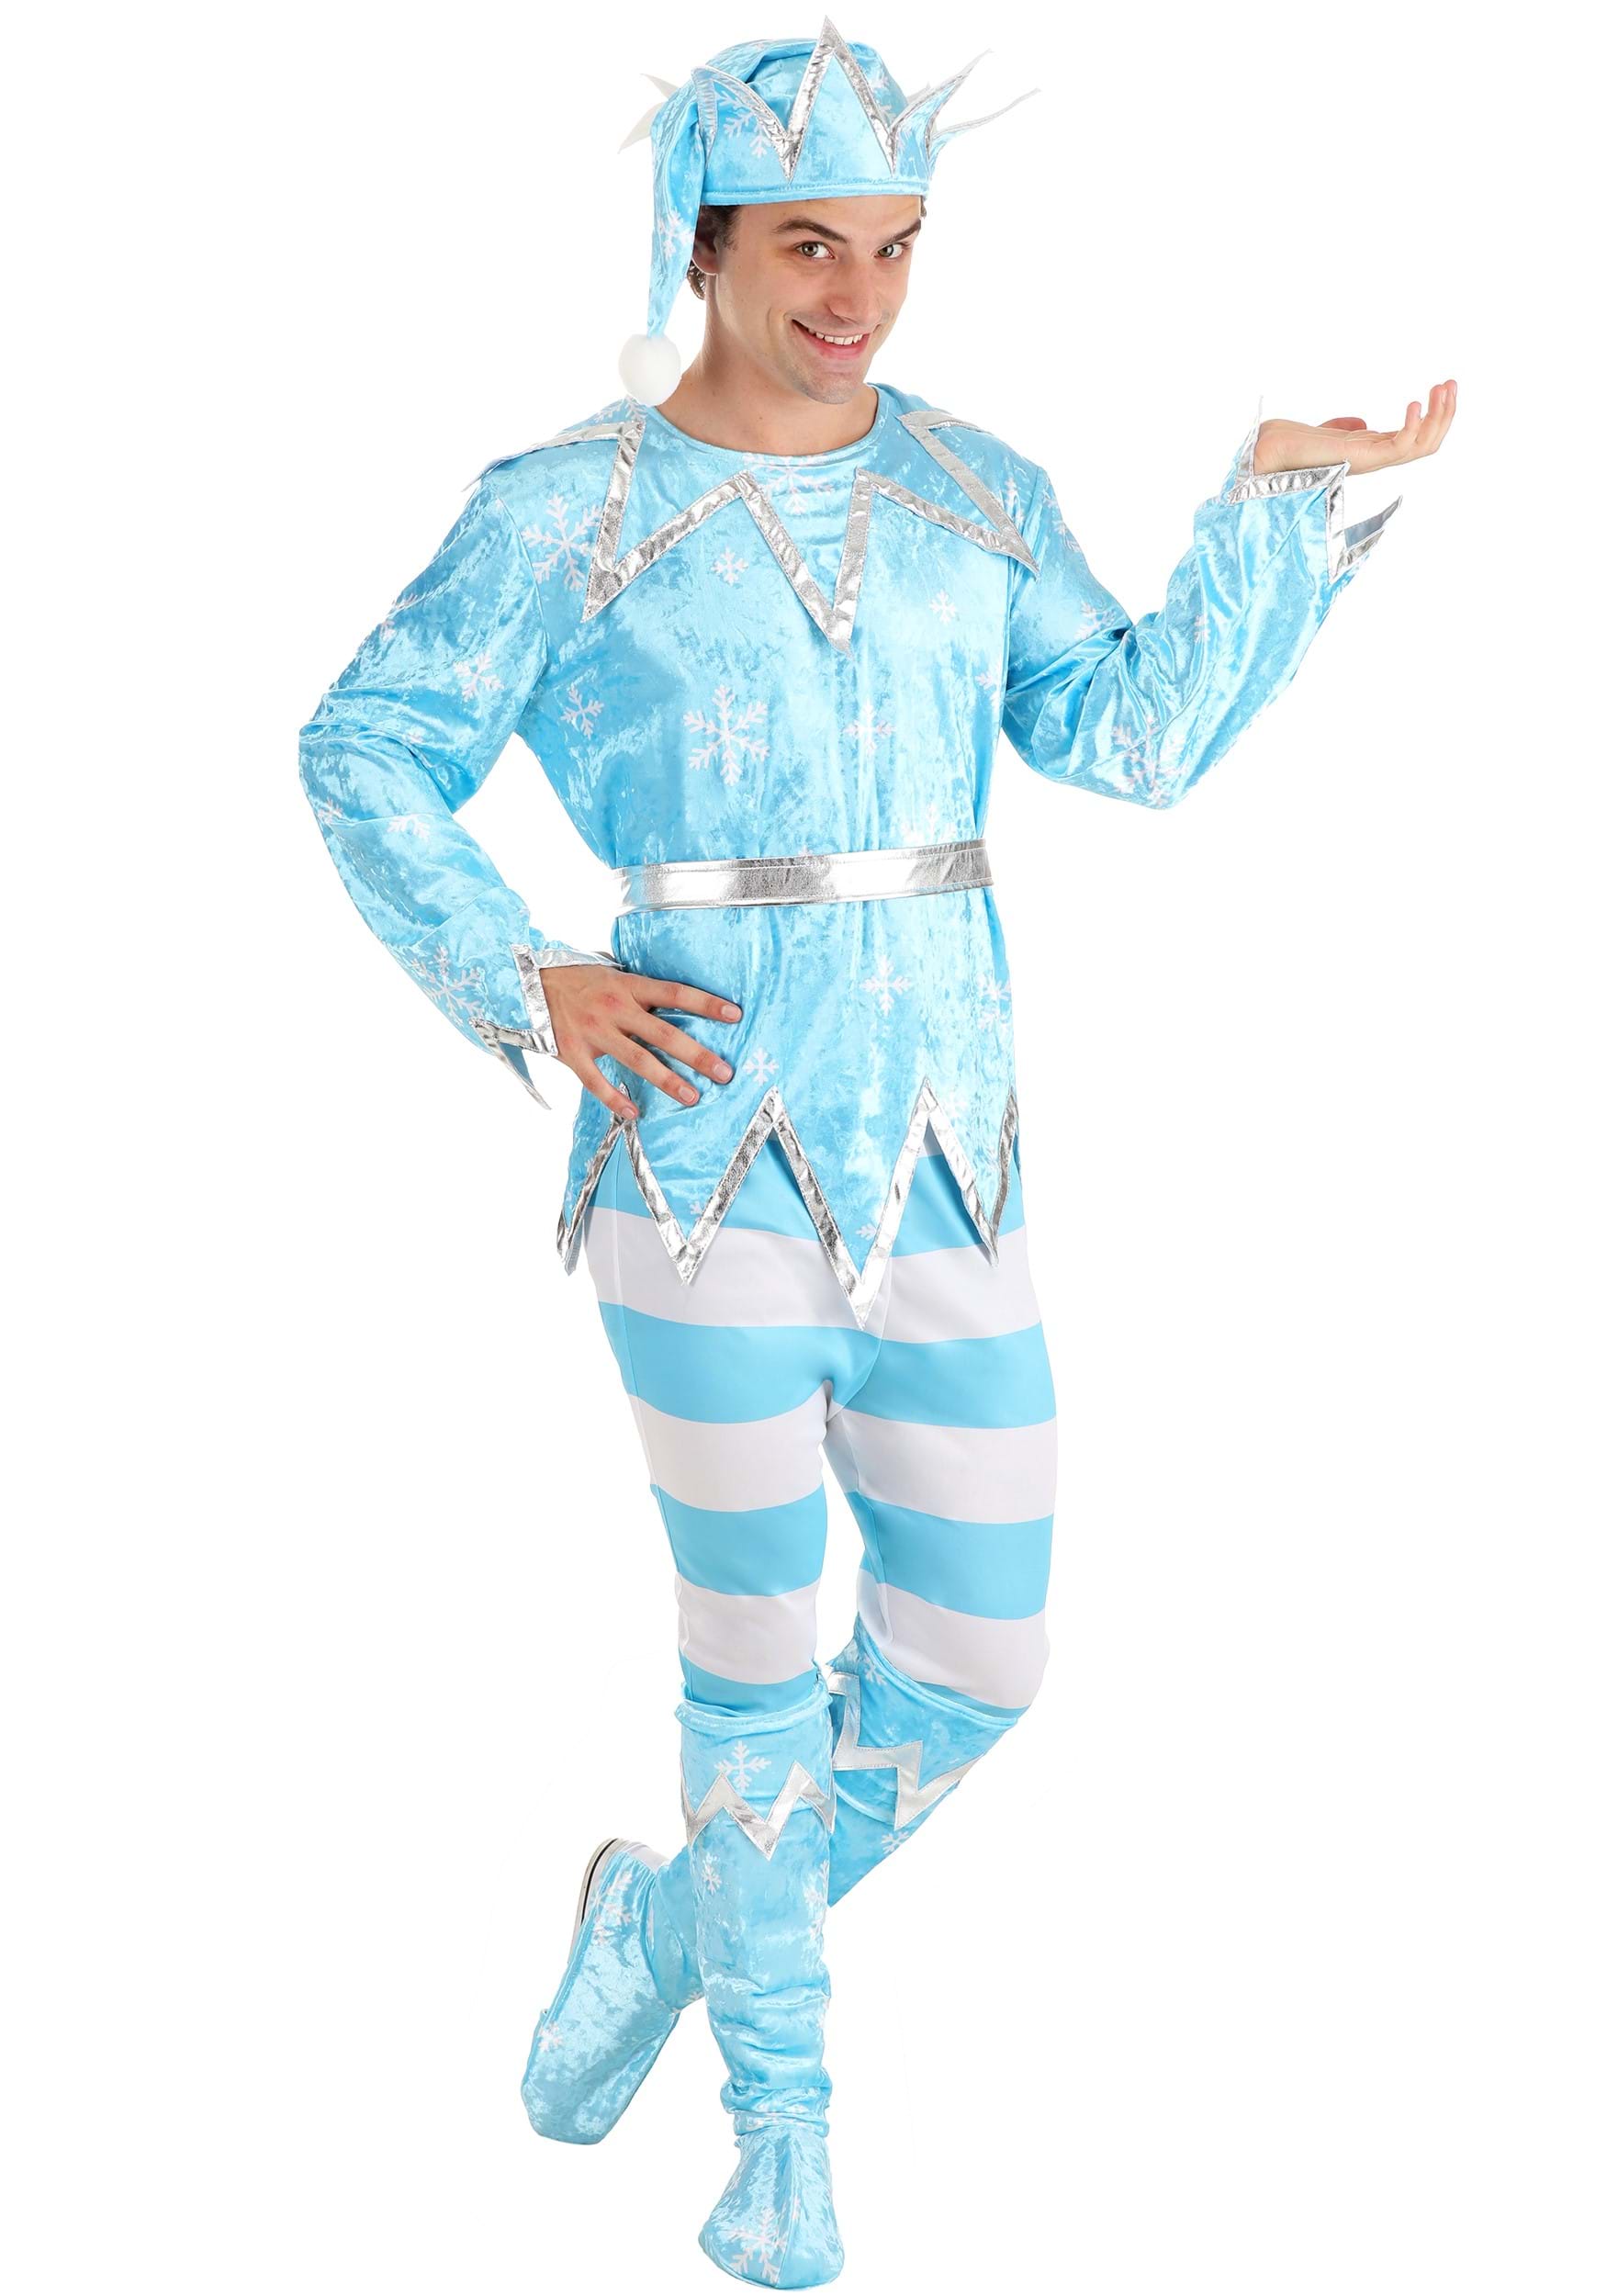 Image of Adult Deluxe Jack Frost Costume ID FUN4353AD-L